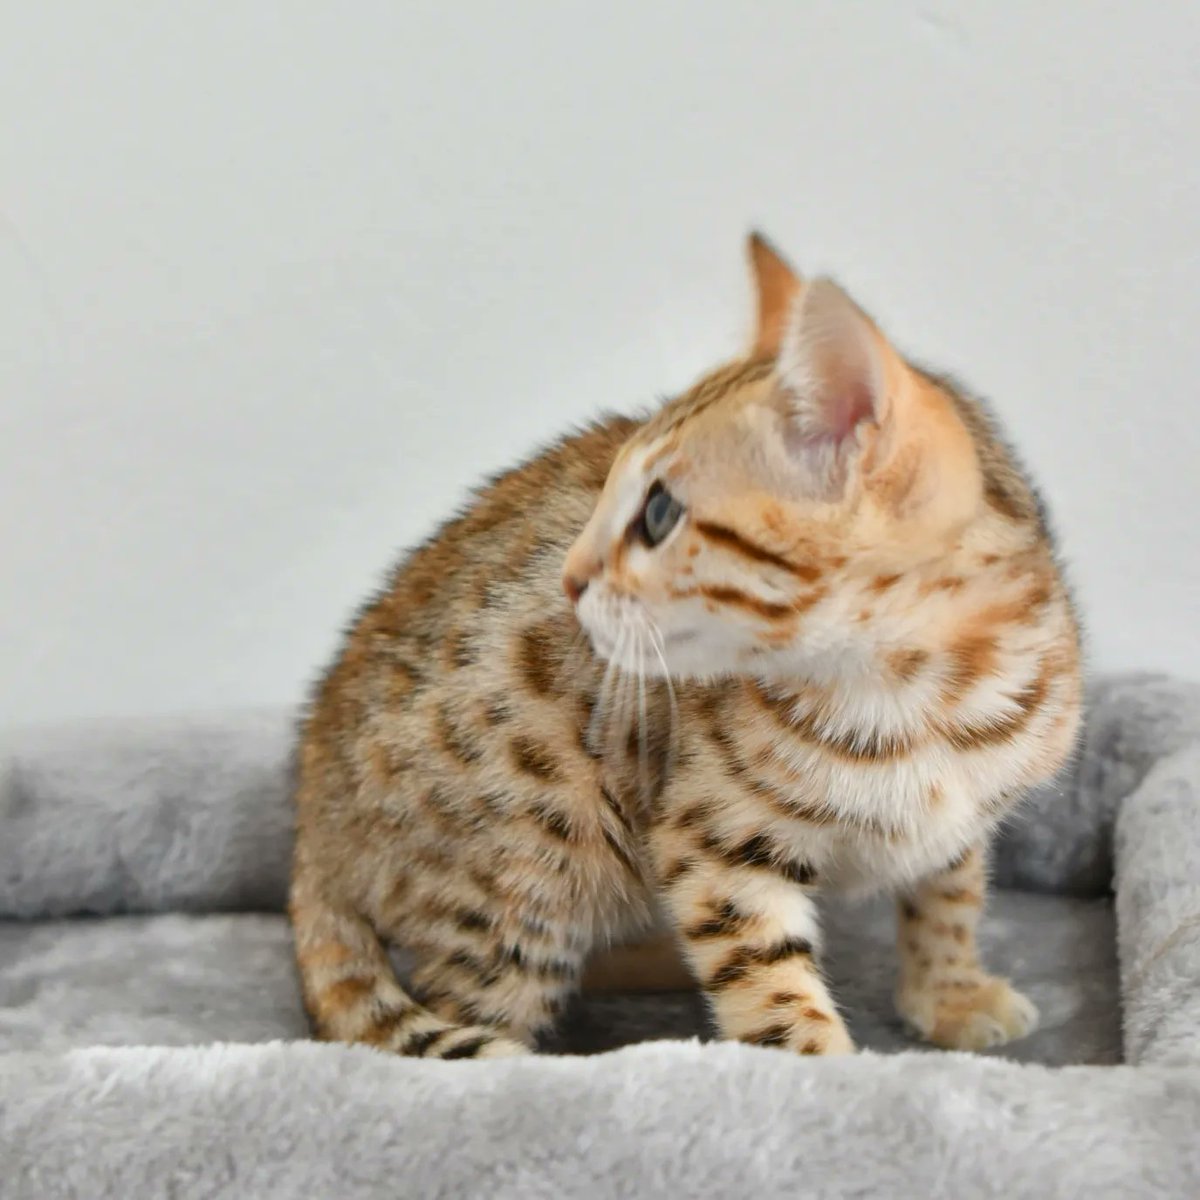 This Beautiful female is available for pet, love her very wild expression🥰🥰
worldwide delivery ✈
more info please DM / Whatsapp to wa.me/34622199814.
#kittens #bengalcat #bengalkitten #gatobengali #pet #Mascotas